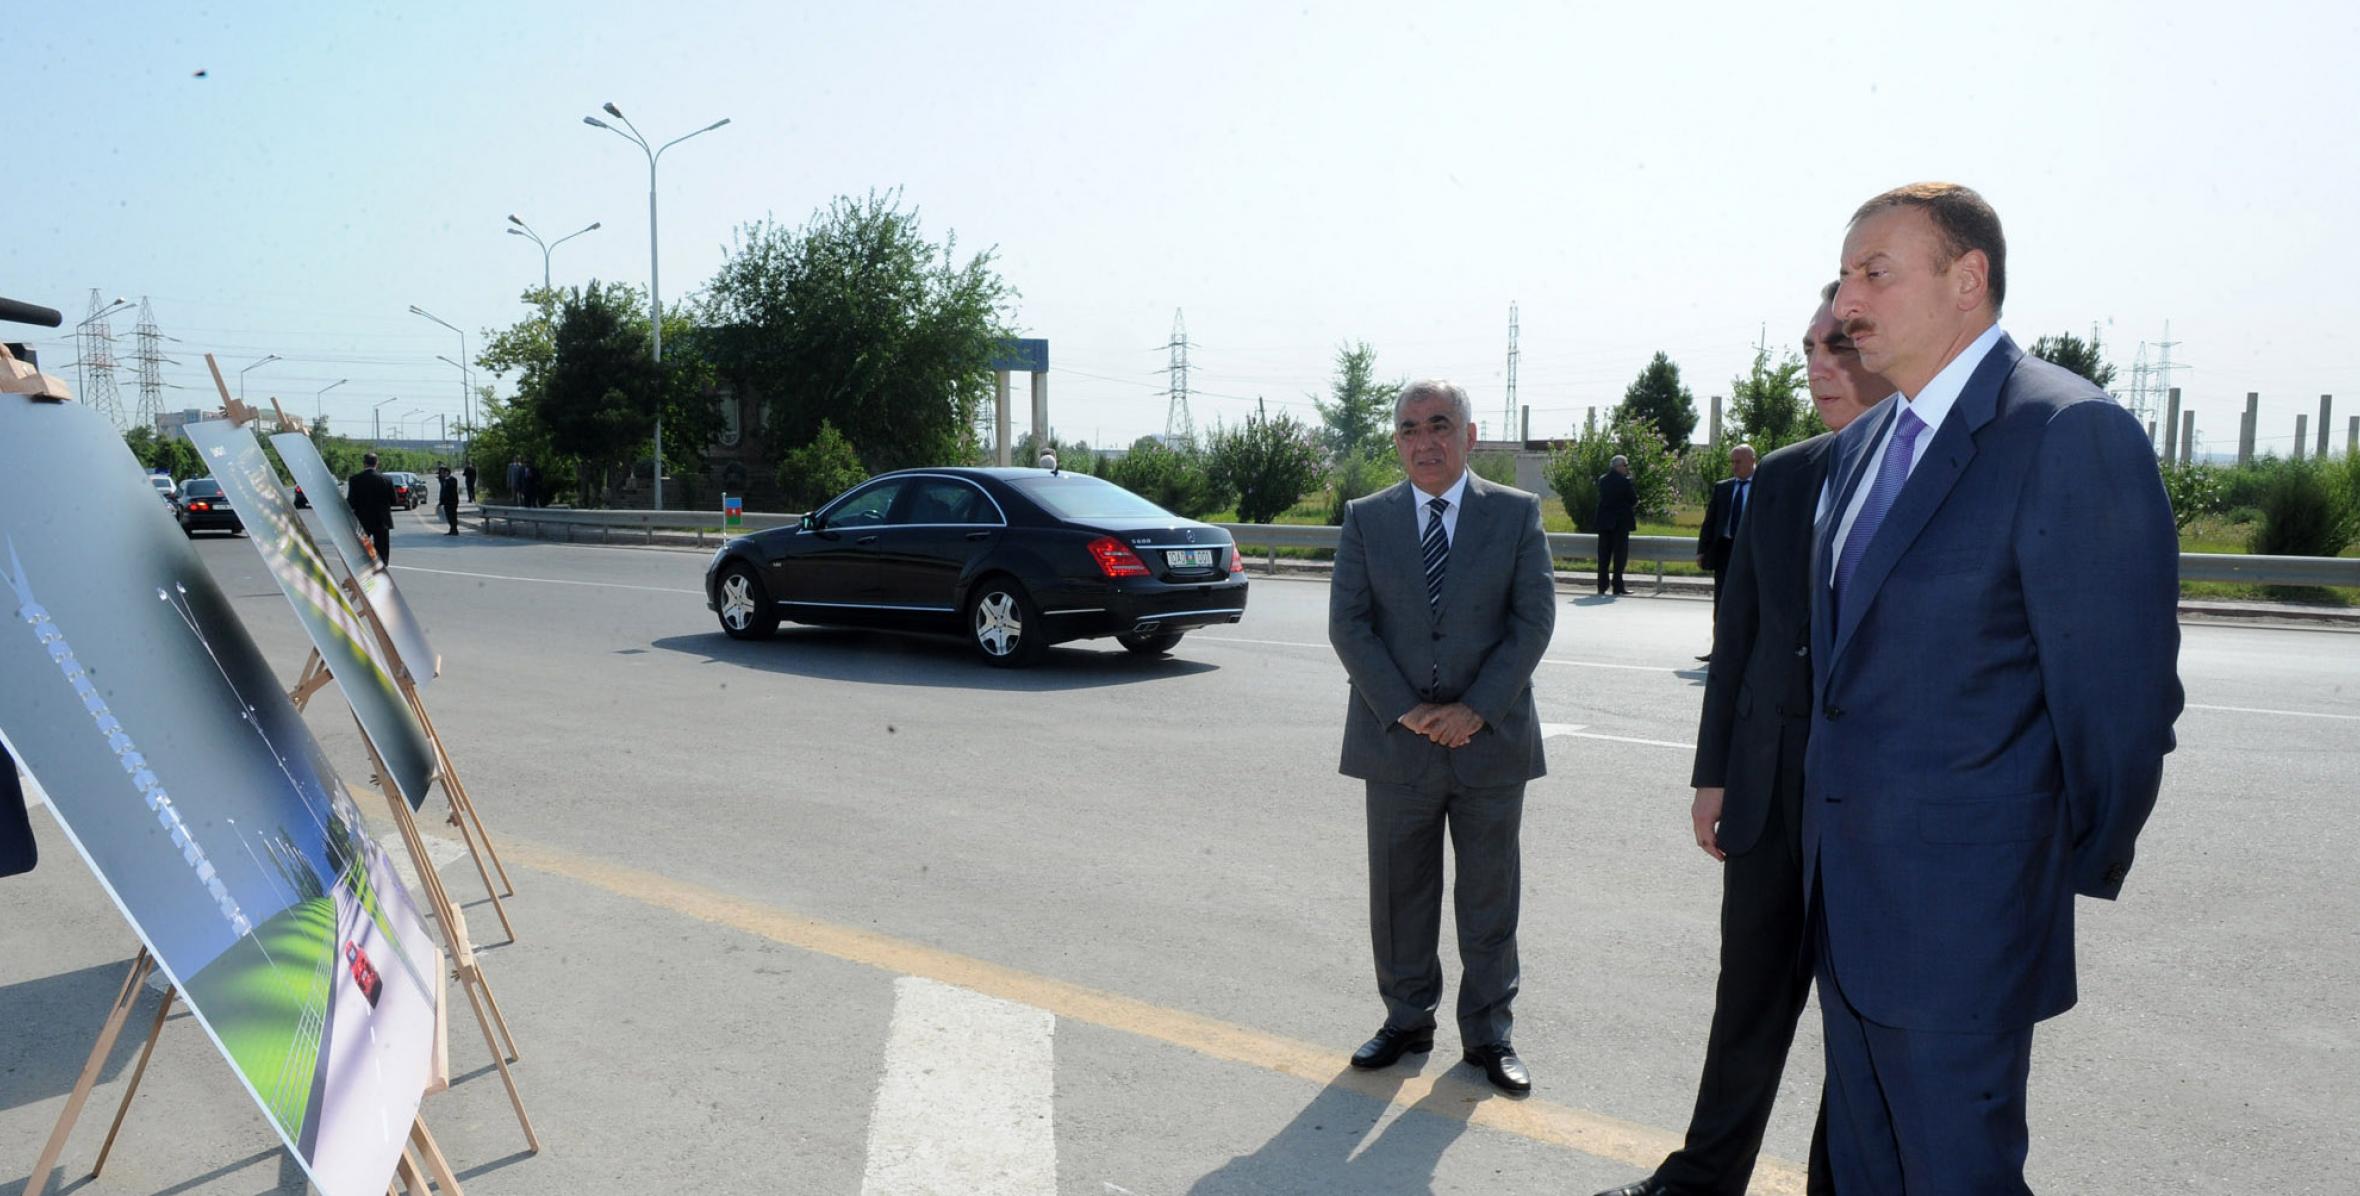 Ilham Aliyev reviewed the stands reflecting the forthcoming reconstruction work at the entrance to and in Sumgayit